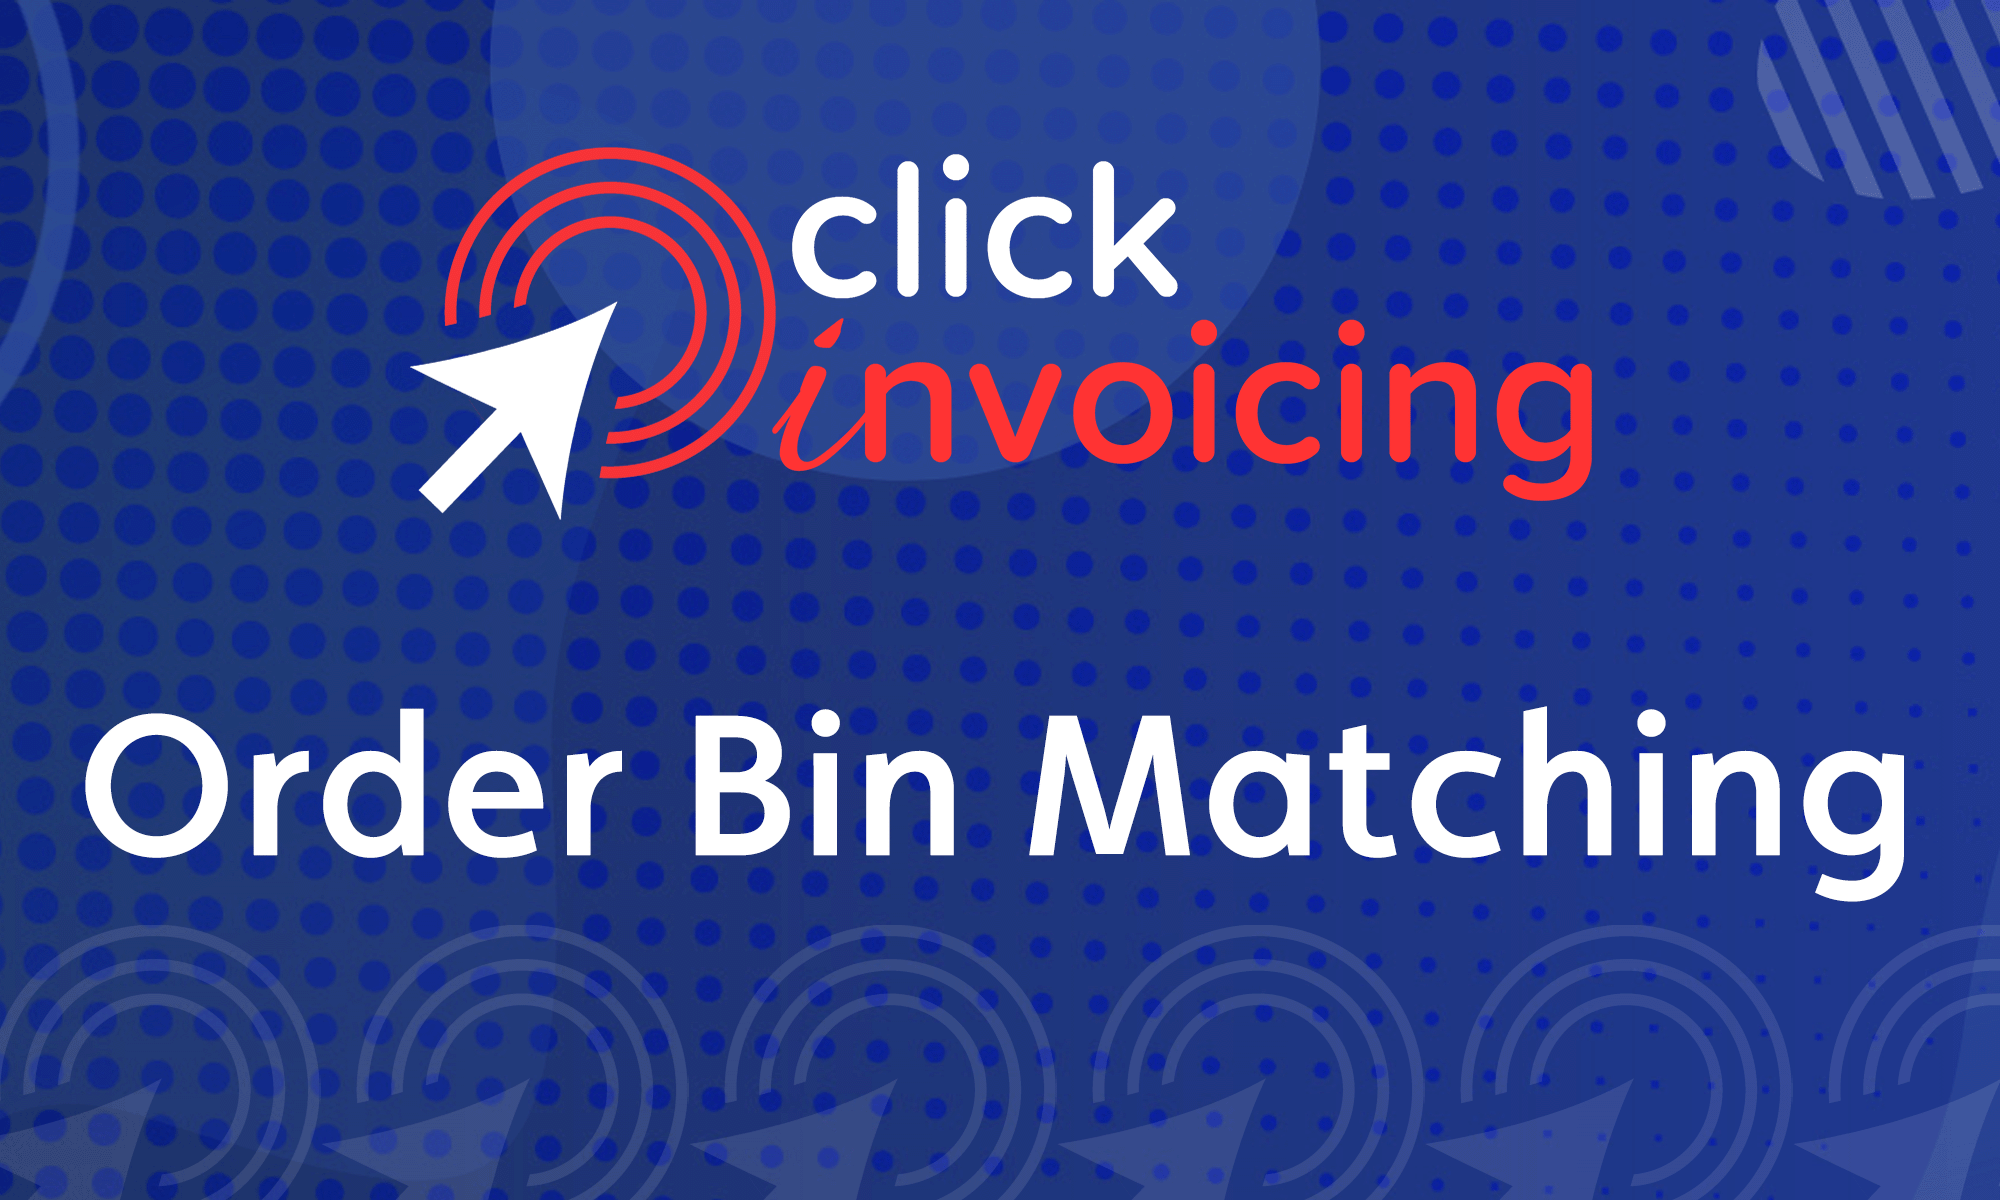 Featured image for “Order Bin Matching”